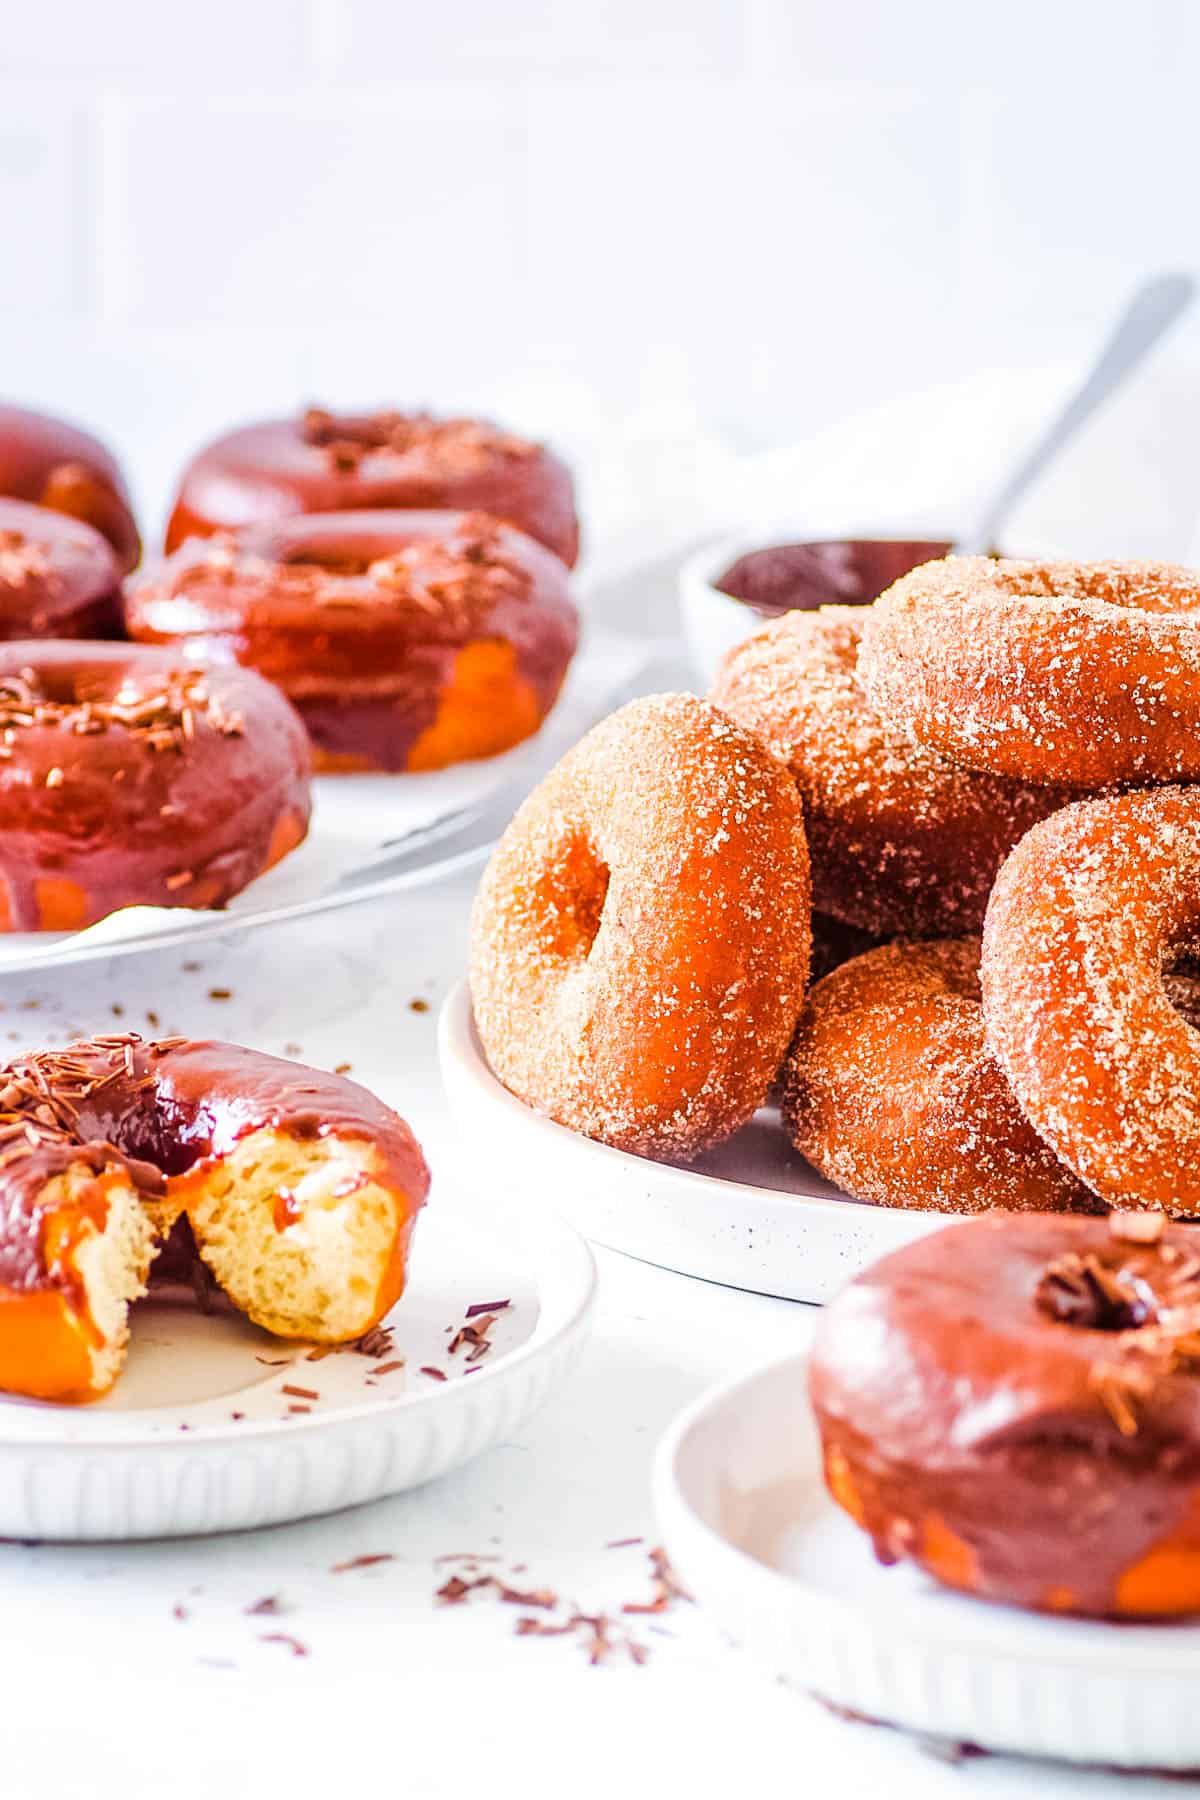 Eggless donuts served two ways - with a cinnamon sugar topping and with a c،colate glaze, served on a few white plates.